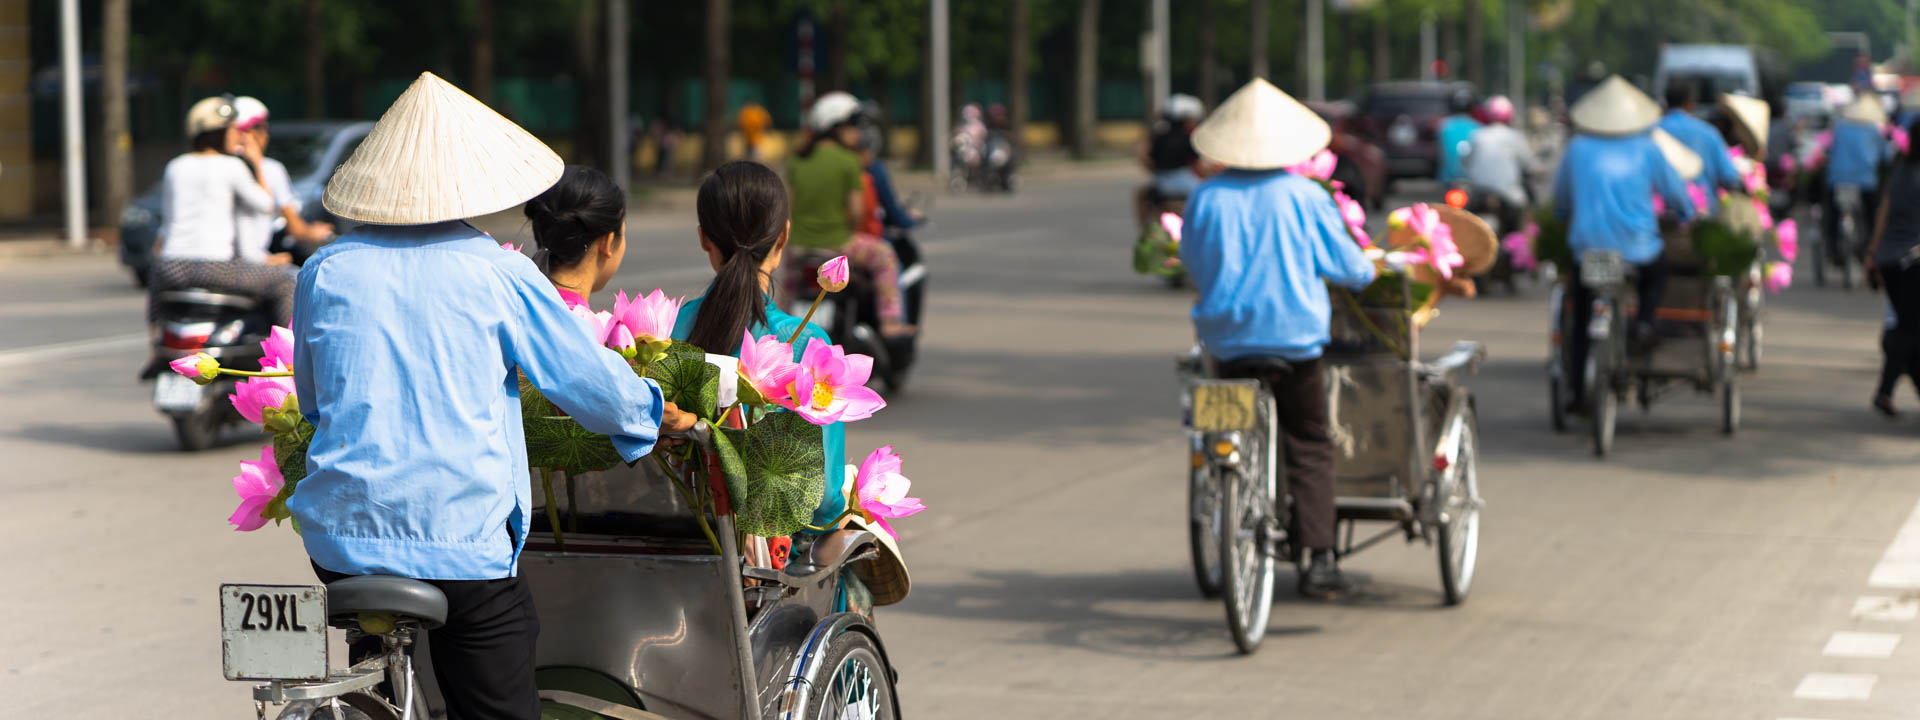 Biking Tour to Discover the Beauty and Charm of the Hanoi Countryside and Red River Delta